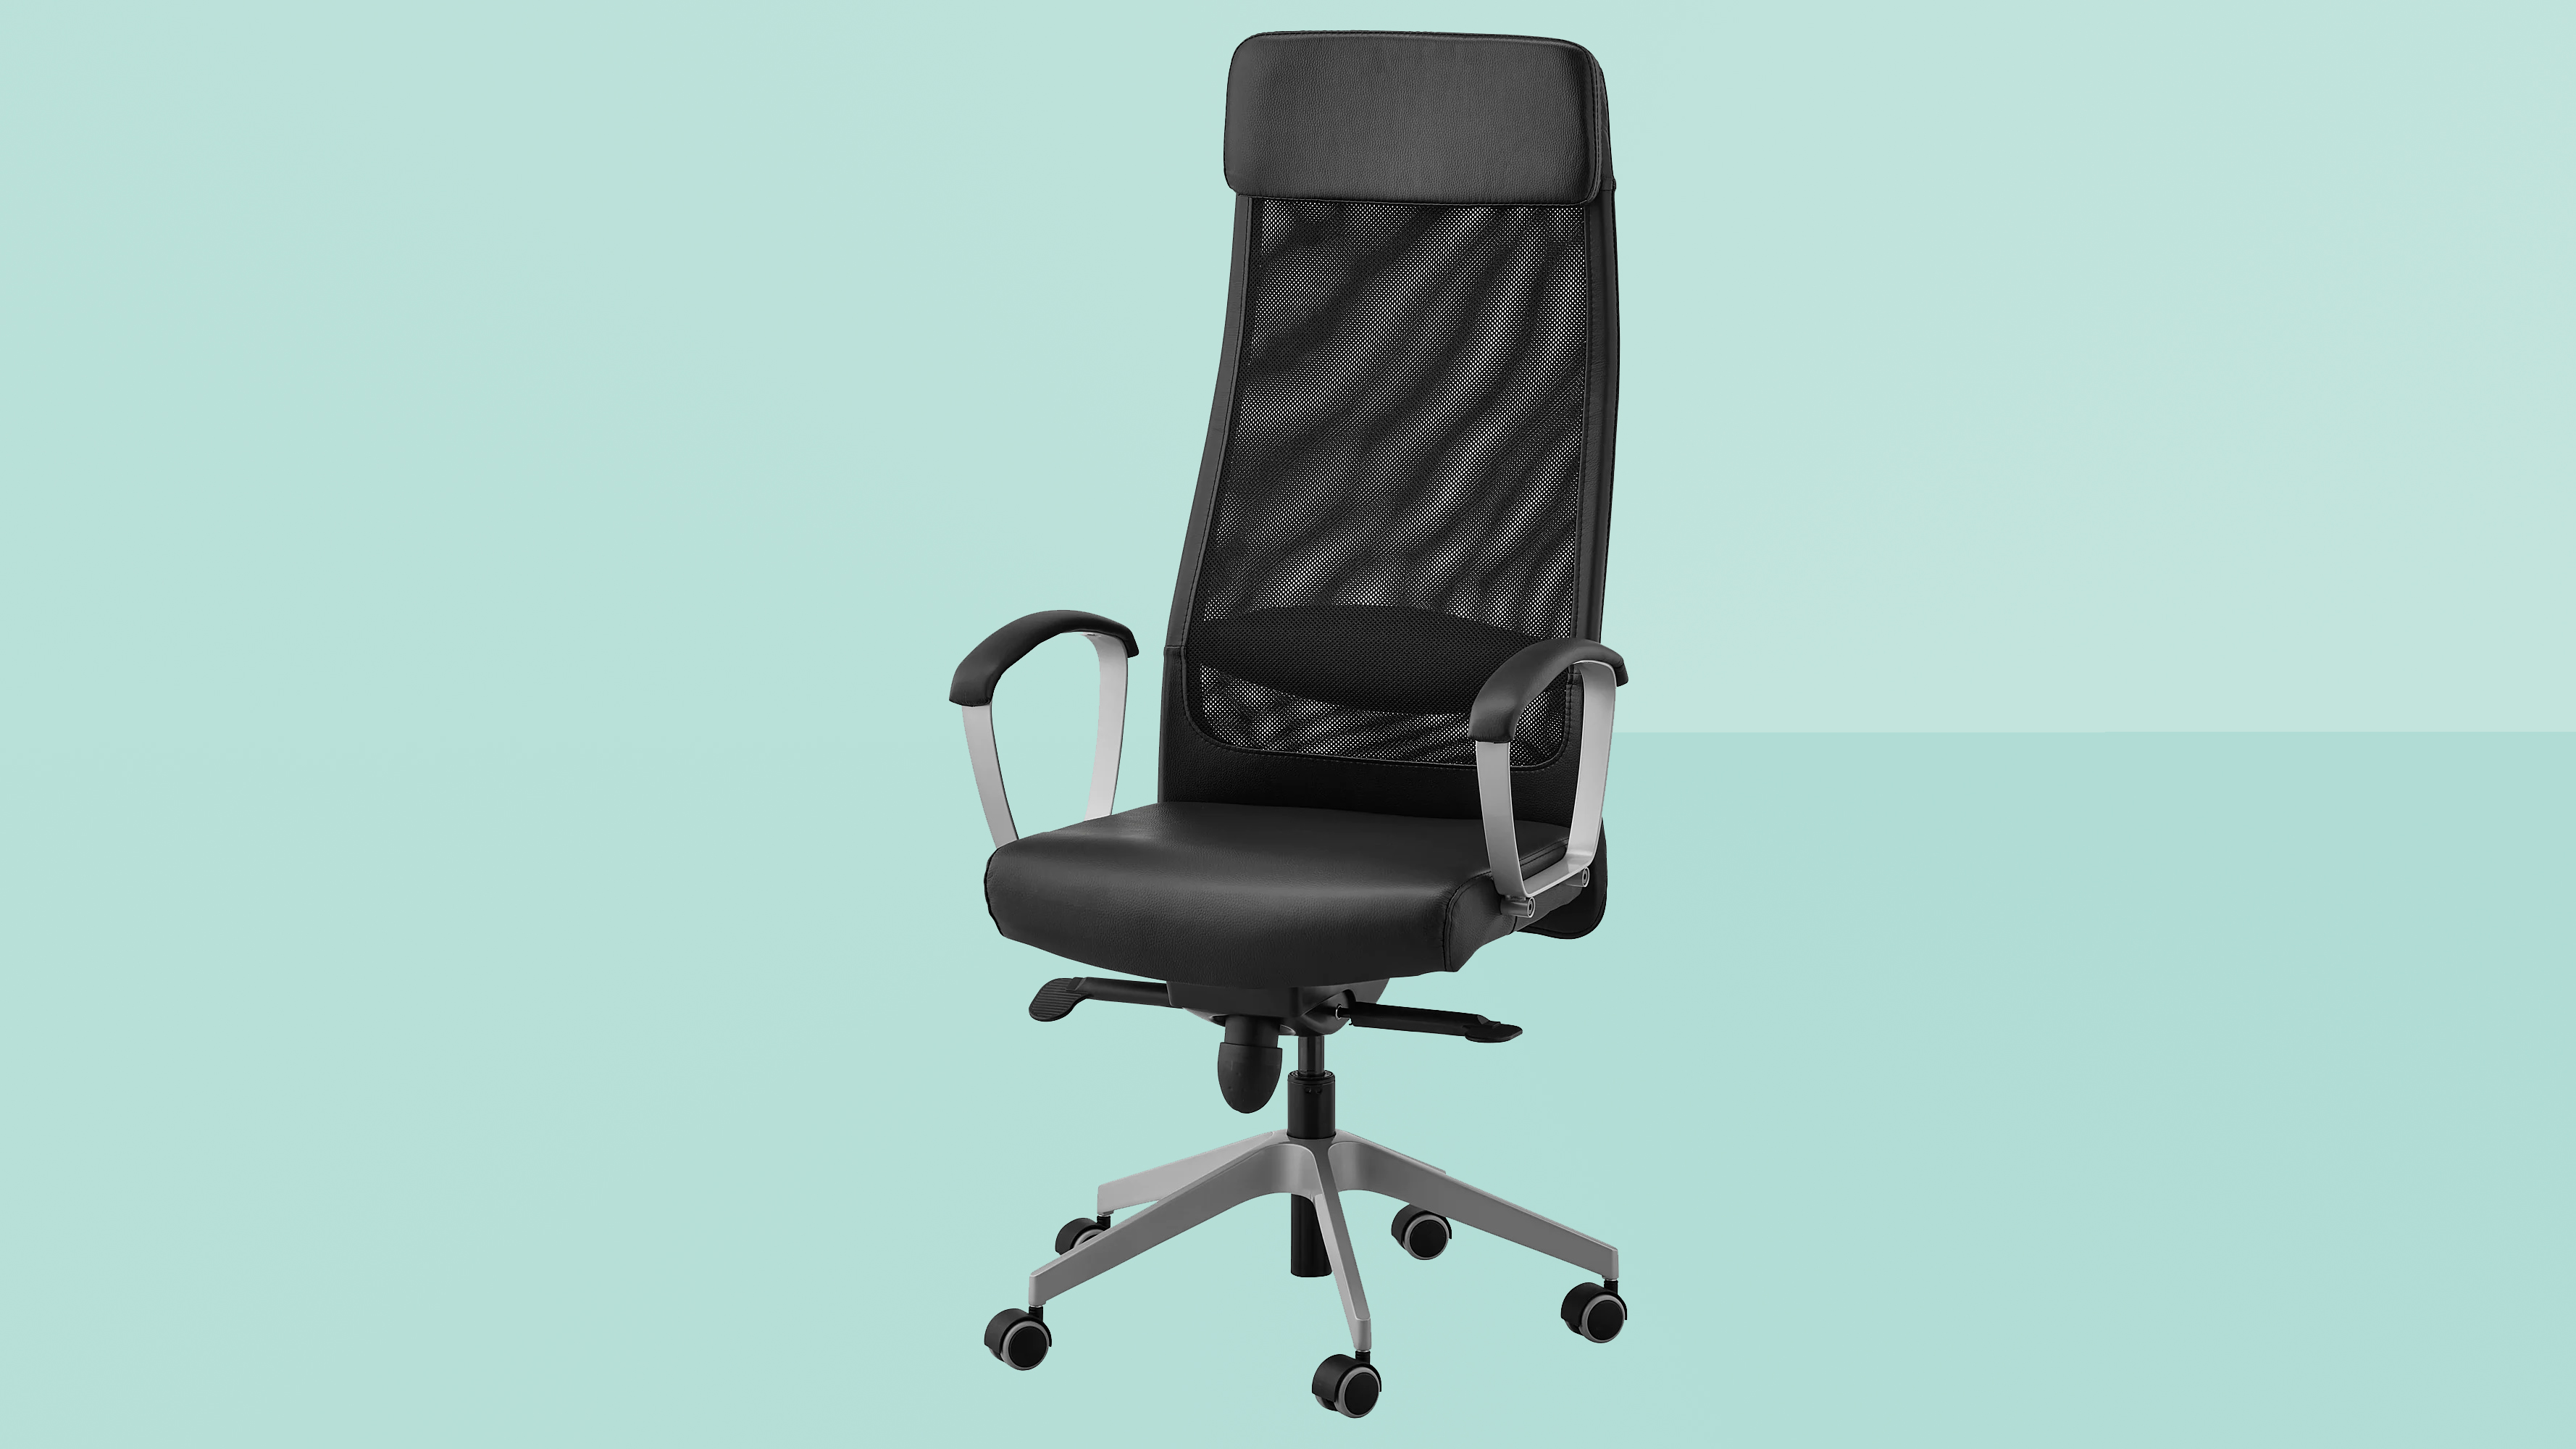 Ikea Markus Office Chair Review T3